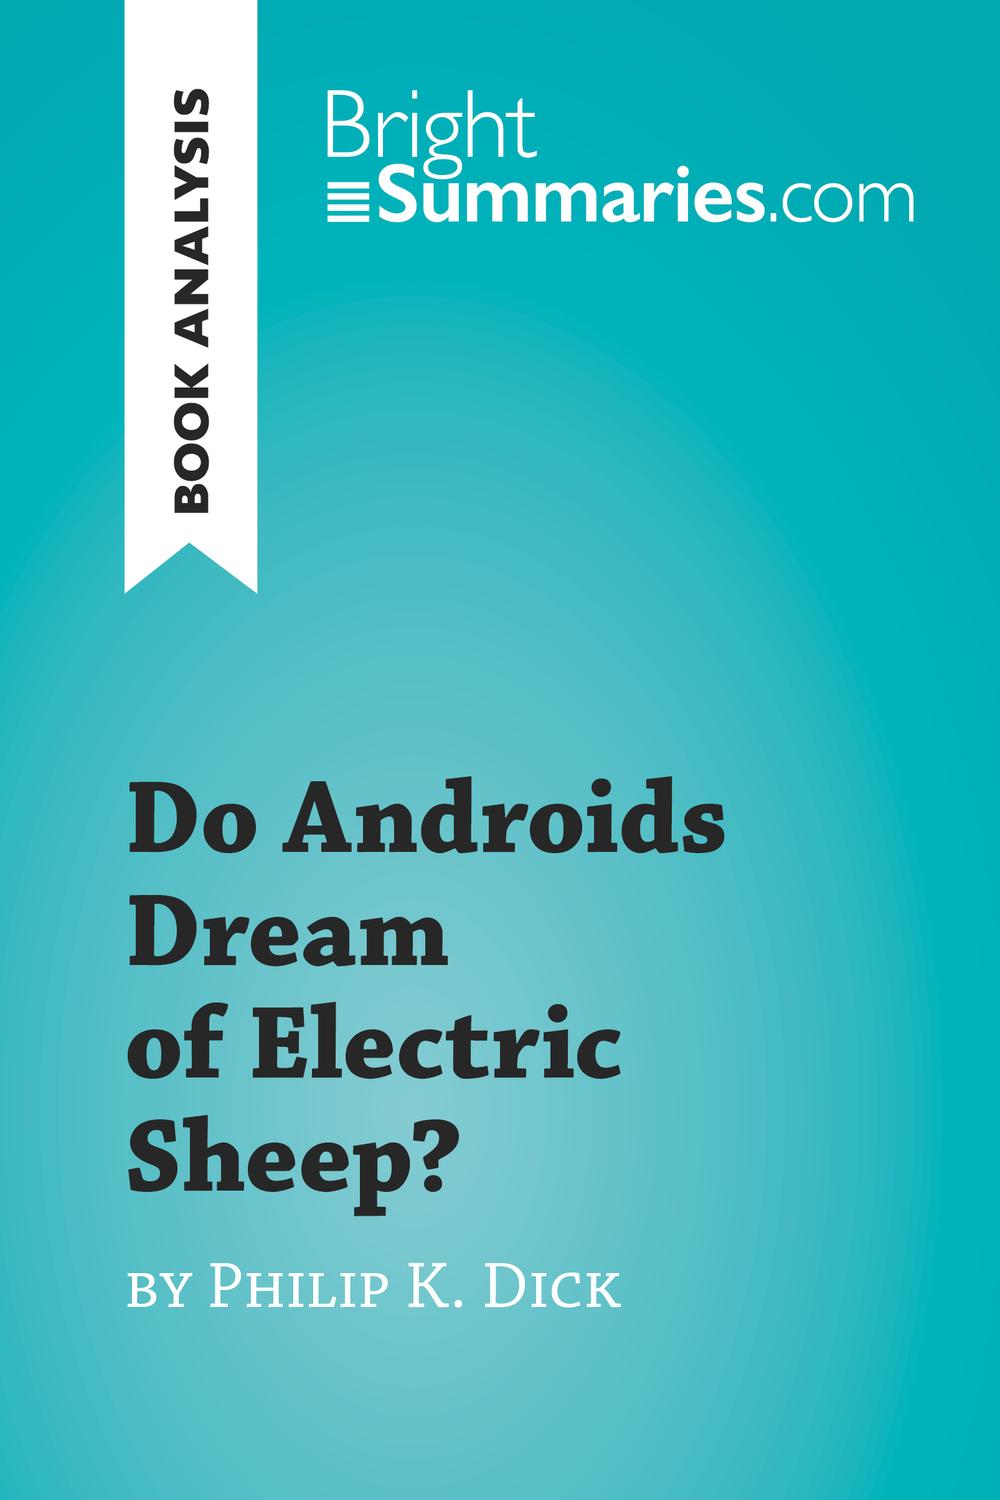 Do Androids Dream of Electric Sheep? by Philip K. Dick (Book Analysis) - Bright Summaries